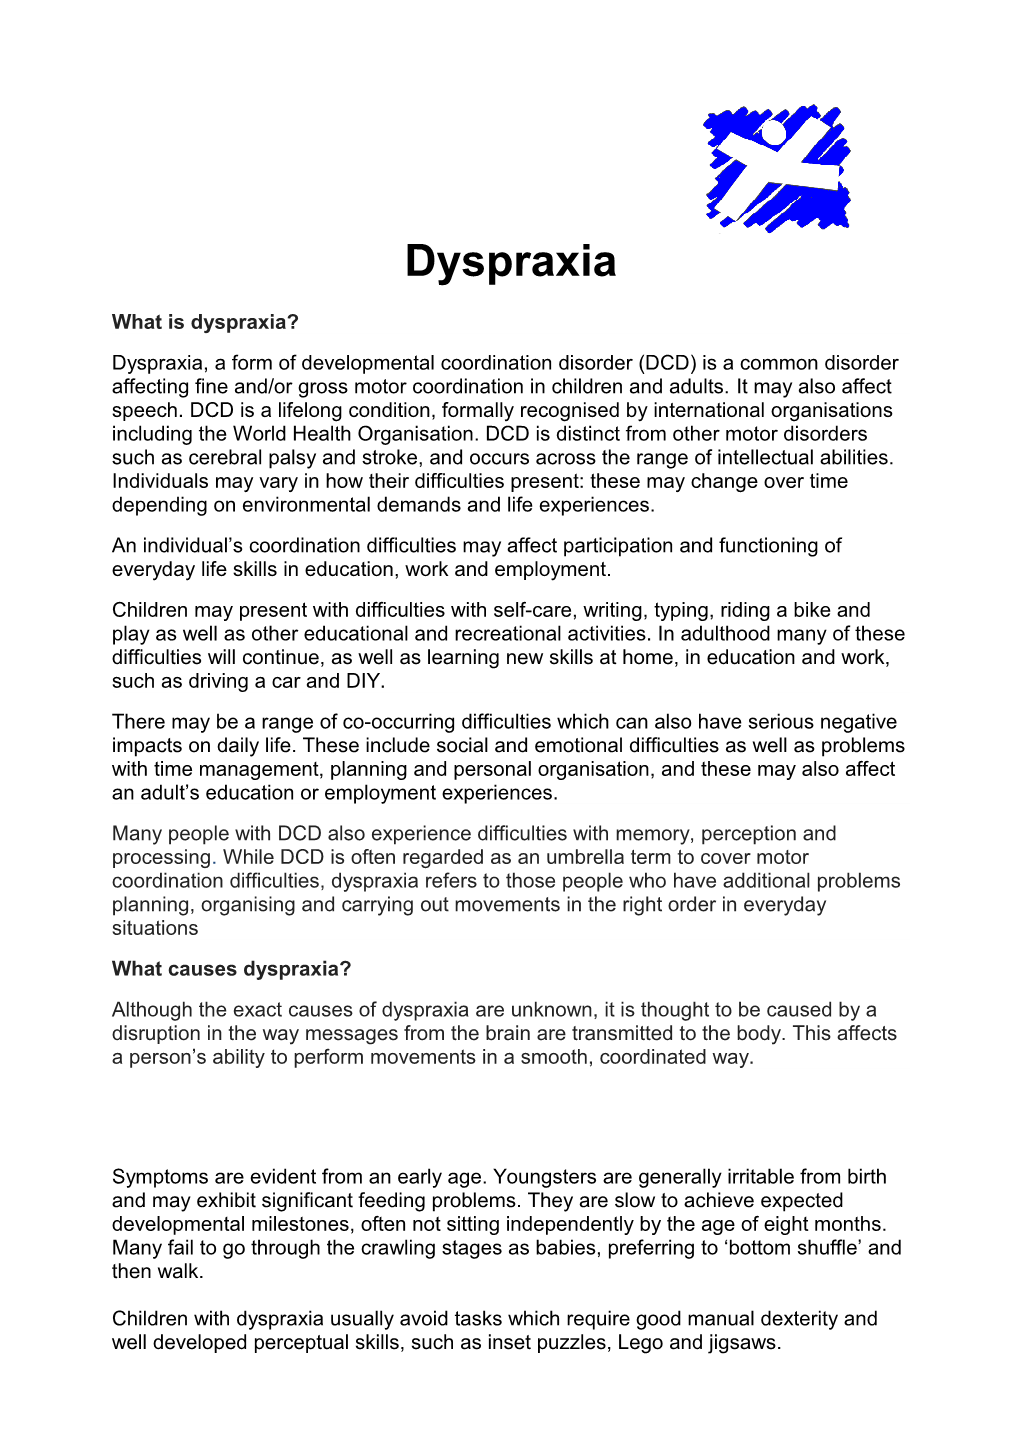 What Is Dyspraxia?